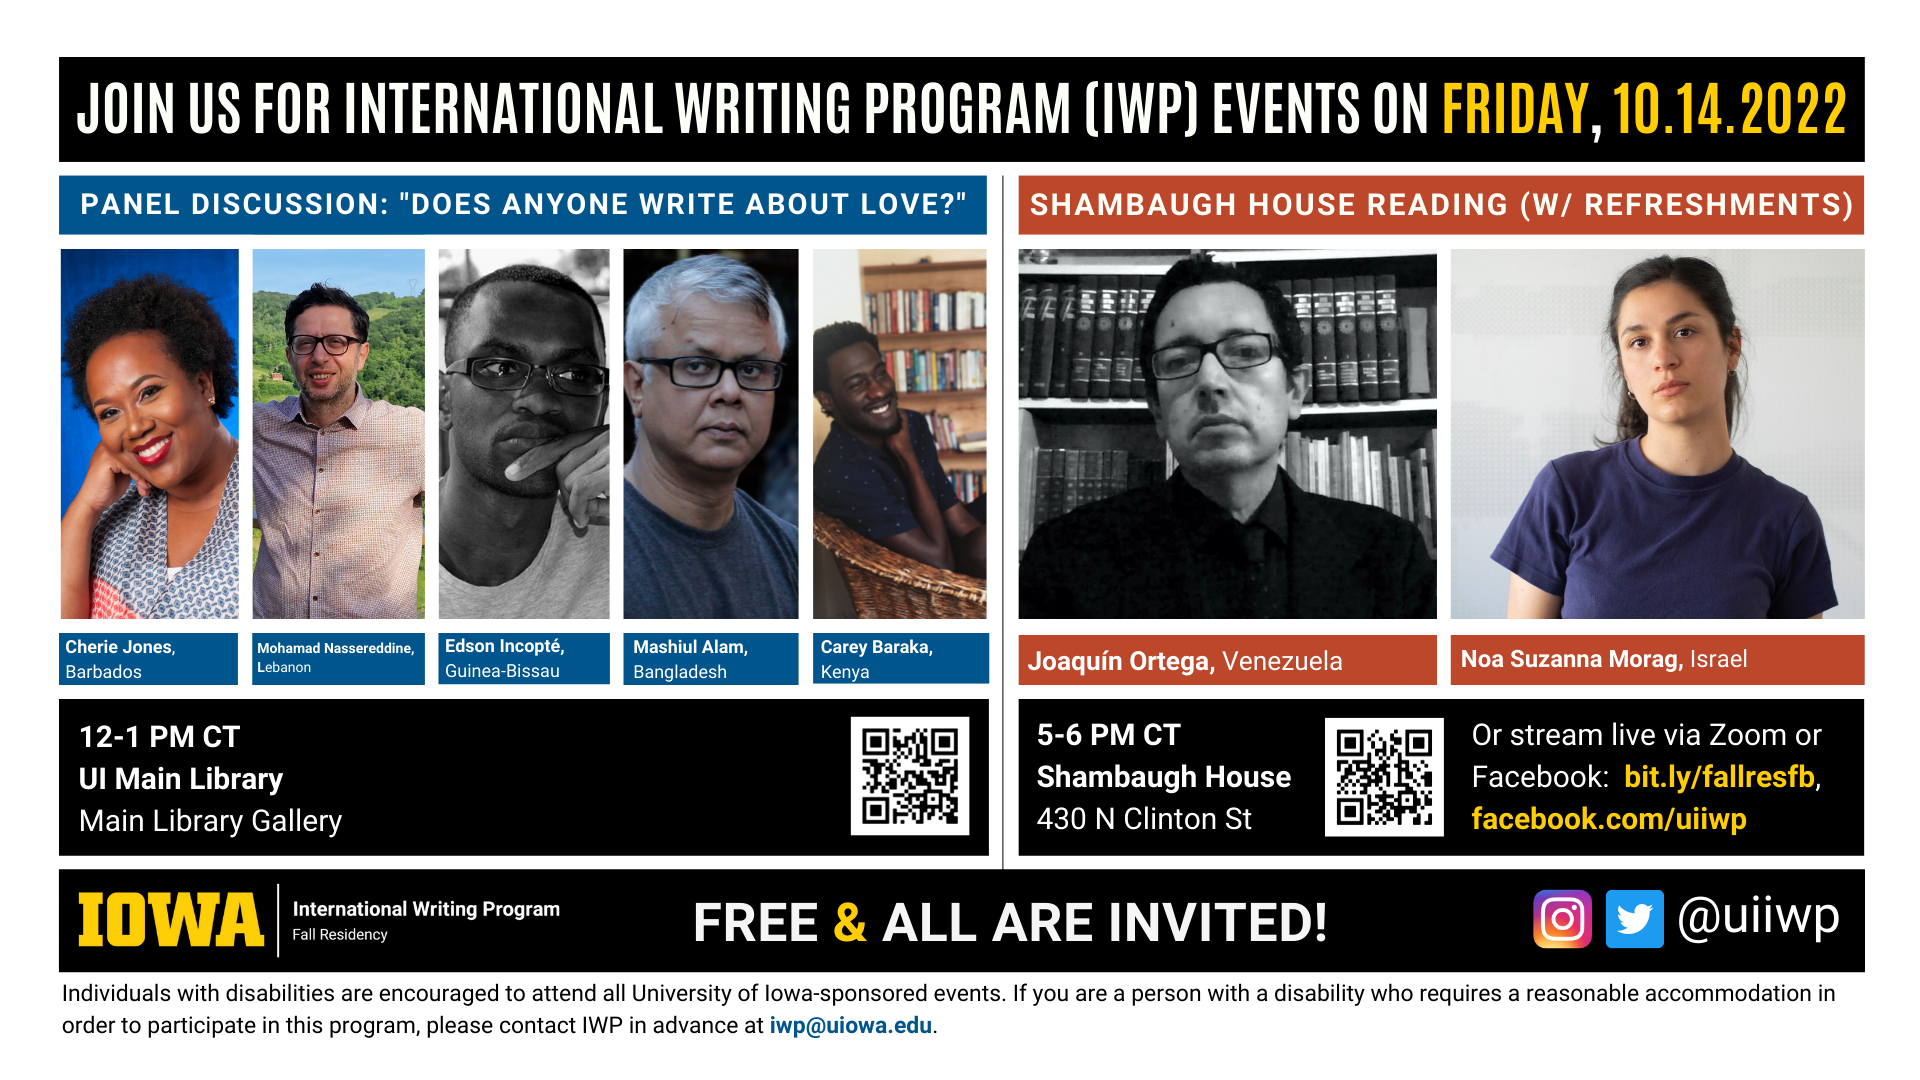 Friday, 10/14 Image: An image with two halves, each advertising one event. The image as a whole is labeled “Join us for International Writing Program (IWP) events on Friday, 10.14.2022.” The left half of the image is labeled, “'Writing the Not Self' Library Panel Discussion.” There are portraits of five writers (named below) and the following text: "Cherie Jones, Barbados. Mohamad Nassereddine, Lebanon. Edson Incopte, Guinea-Bissau. Mashiul Alam, Bangladesh. Carey Baraka, Kenya. 12-1 PM CT, UI Main Library, Main Library Gallery." The right half of the image is labeled “Shambaugh House Reading w/ refreshments. It features portraits of two writers (named below) and the following text: "Joaquín Ortega, Venezuela. Noa Suzanna Morag, Israel. 5-6 PM CT, Shambaugh House, 430 N. Clinton St. Or stream live via Zoom or Facebook: bit.ly/fallresfb, facebook.com/uiiwp.” Below that text there are the IWP Fall Residency logo, the Instagram and Twitter handle @uiiwp, and a note that the event is “Free & All Are Invited.” The following text is at the bottom of the image: "Individuals with disabilities are encouraged to attend all University of Iowa-sponsored events. If you are a person with a disability who requires a reasonable accommodation in order to participate in this program, please contact IWP in advance at iwp@uiowa.edu.”